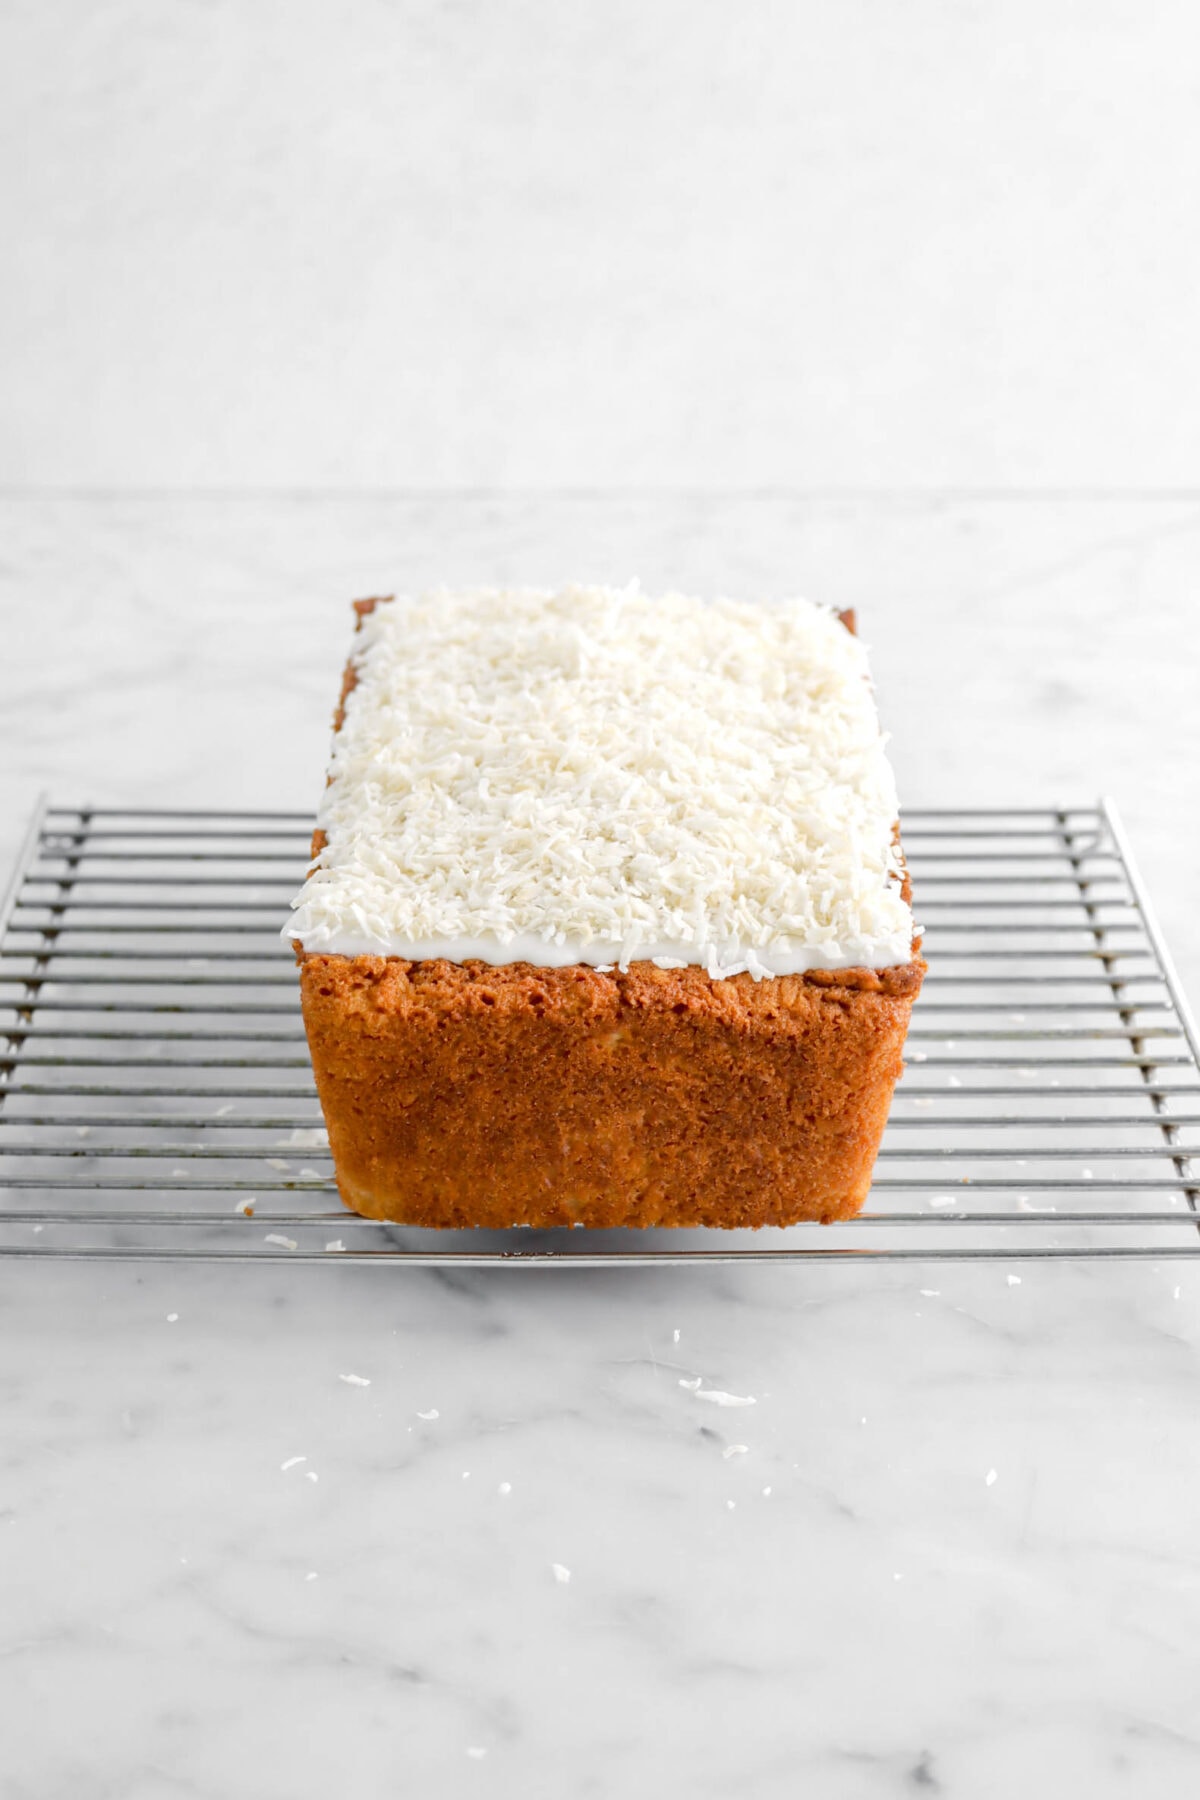 shredded coconut added on top of icing on loaf cake.